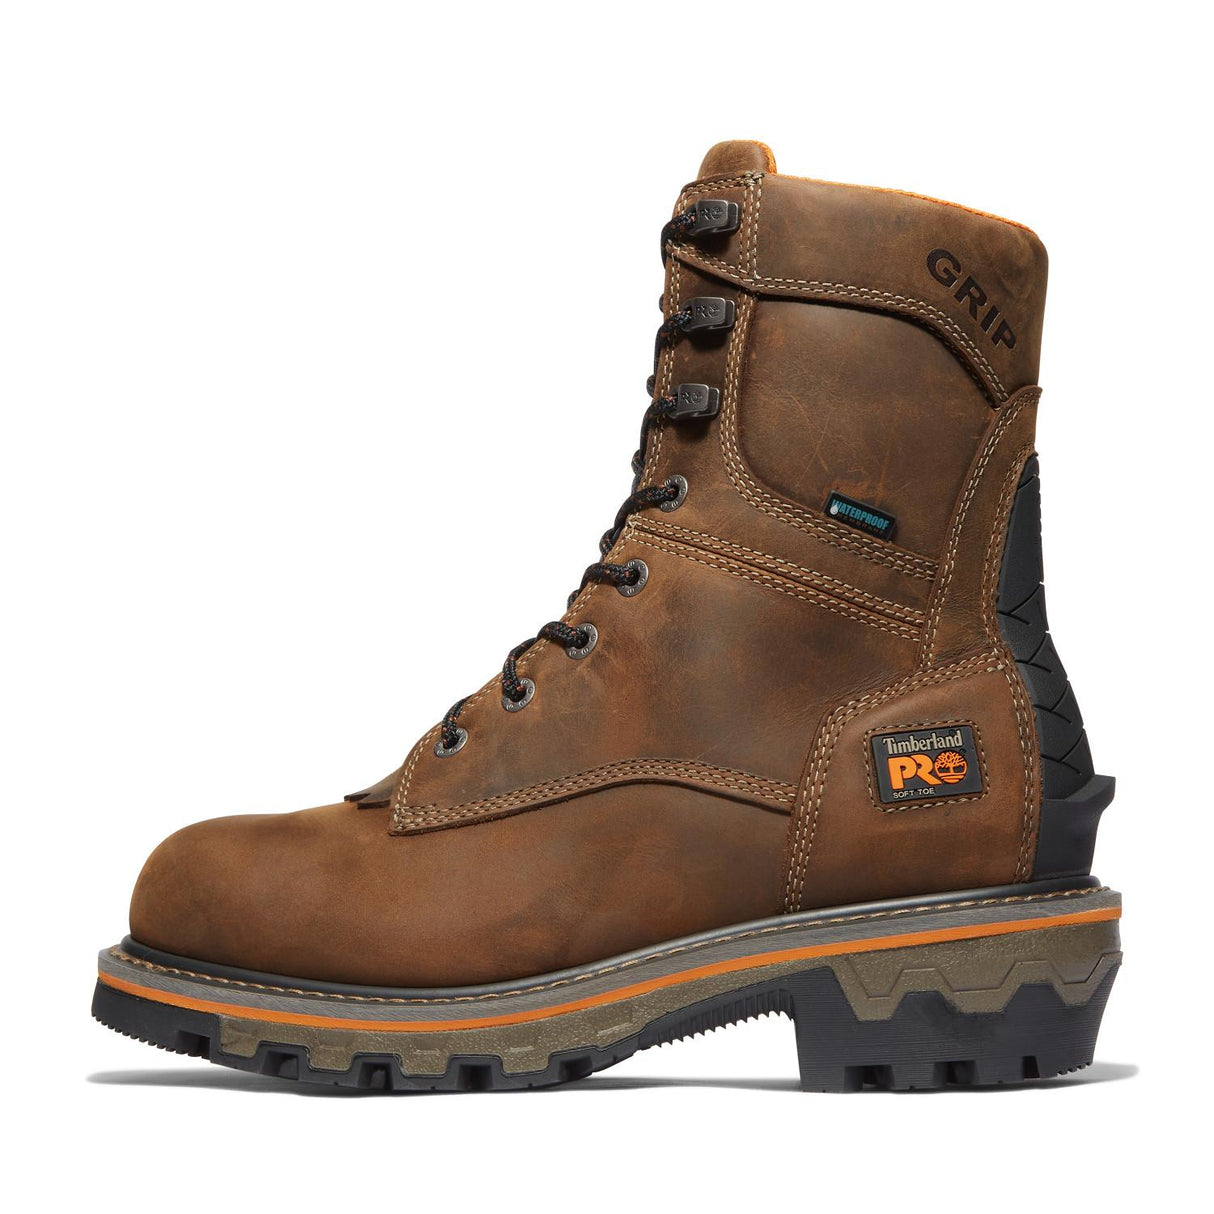 Timberland Pro-Boondock Hd Logger Brown-Steel Toes-5